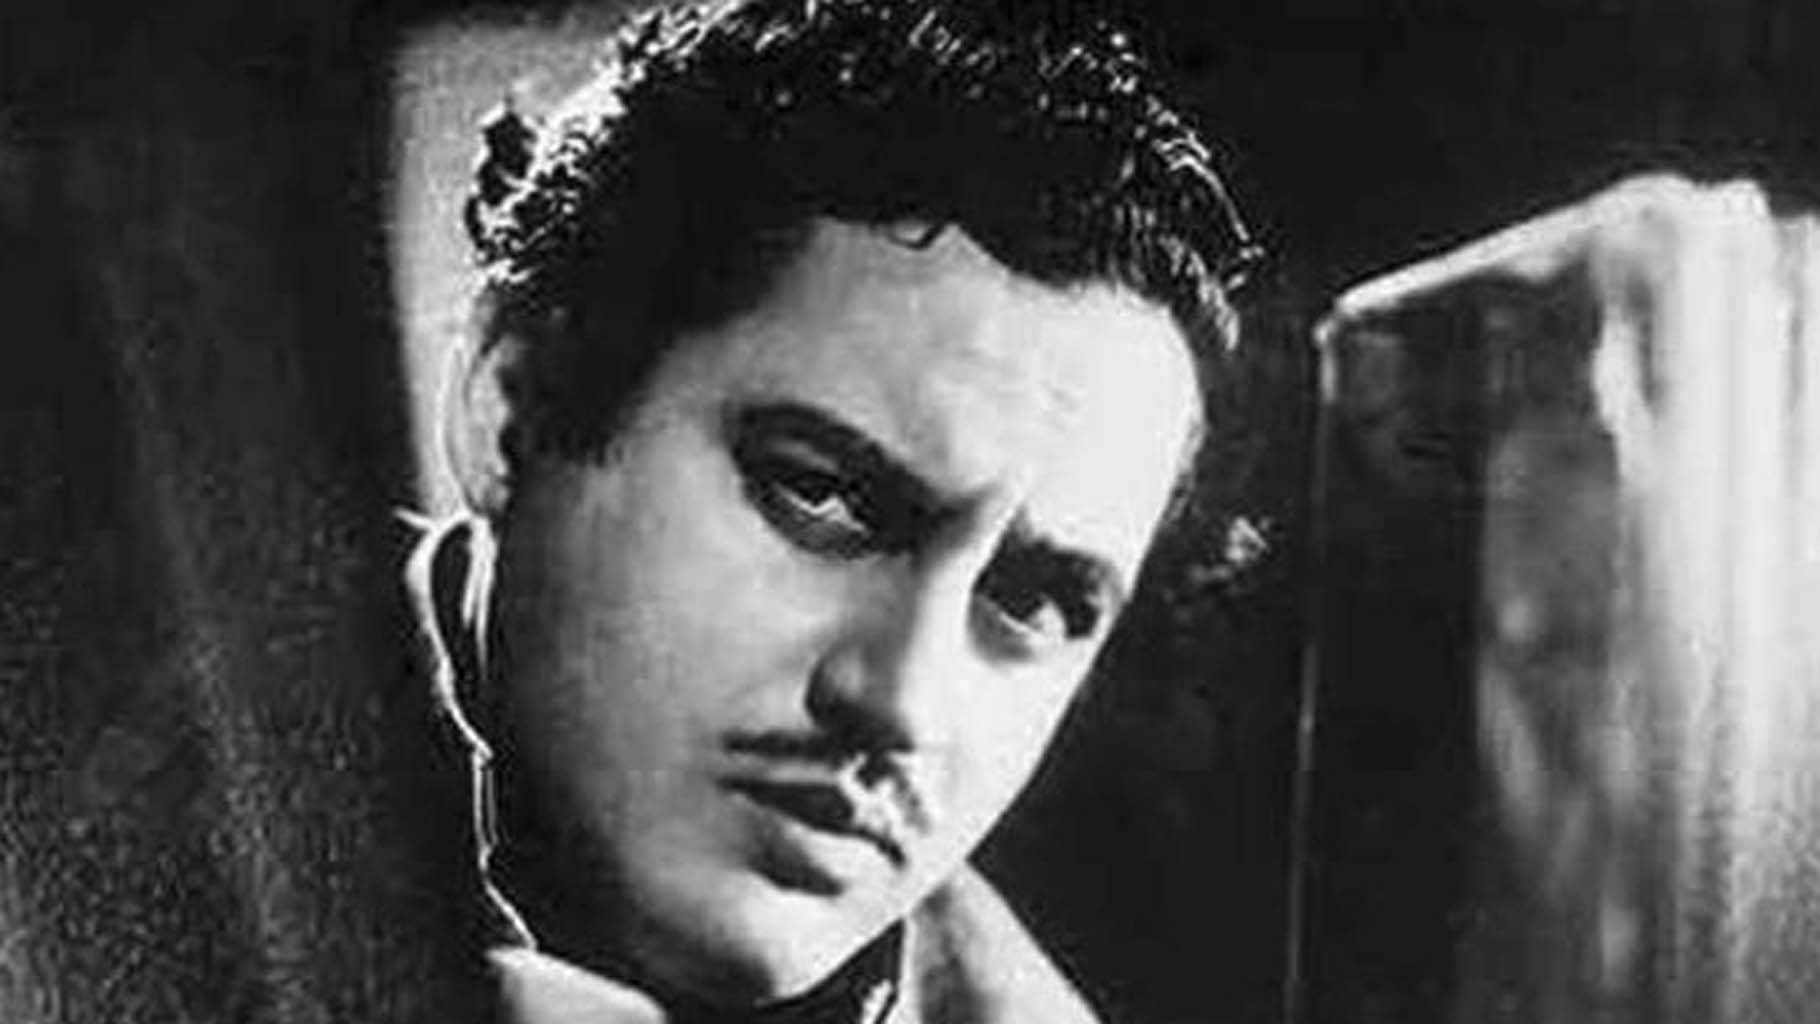 ____________ was accredited for steering the Golden Era of Indian Cinema and died in 1964.